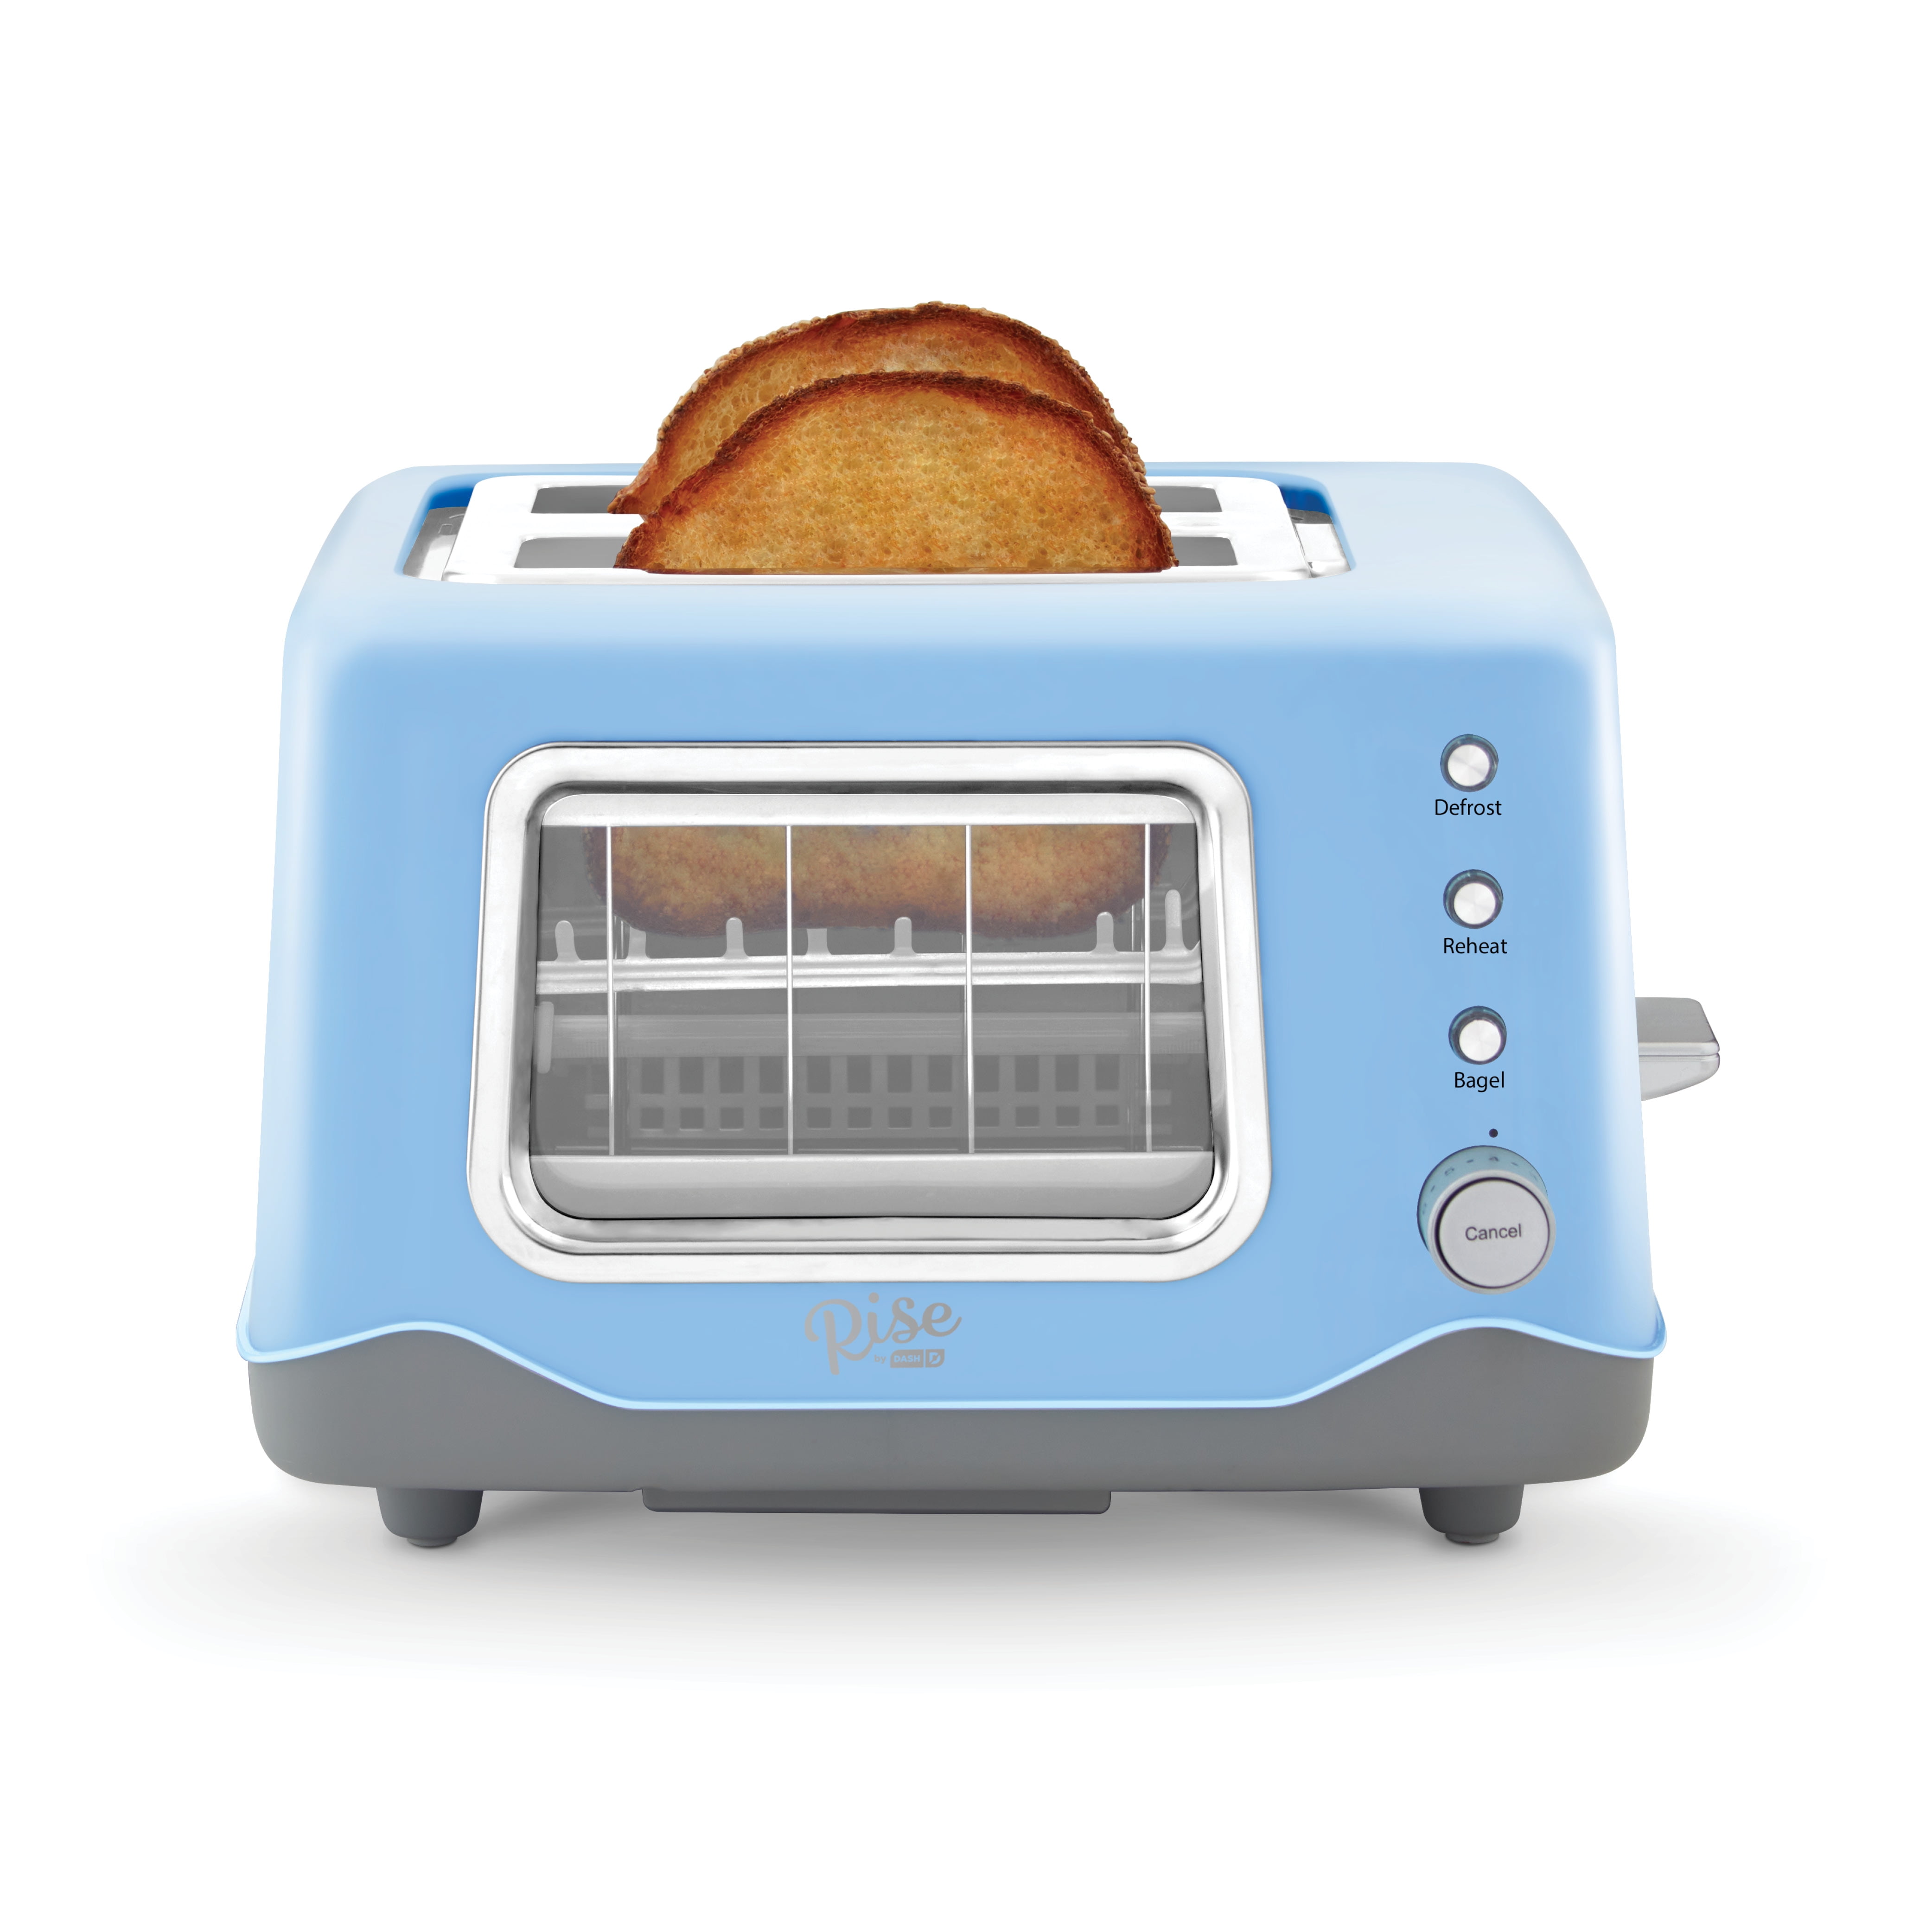 Daewoo 2 Slice Toaster Glass Front Wide Slot Defrost Reheat Bagel Function  900W